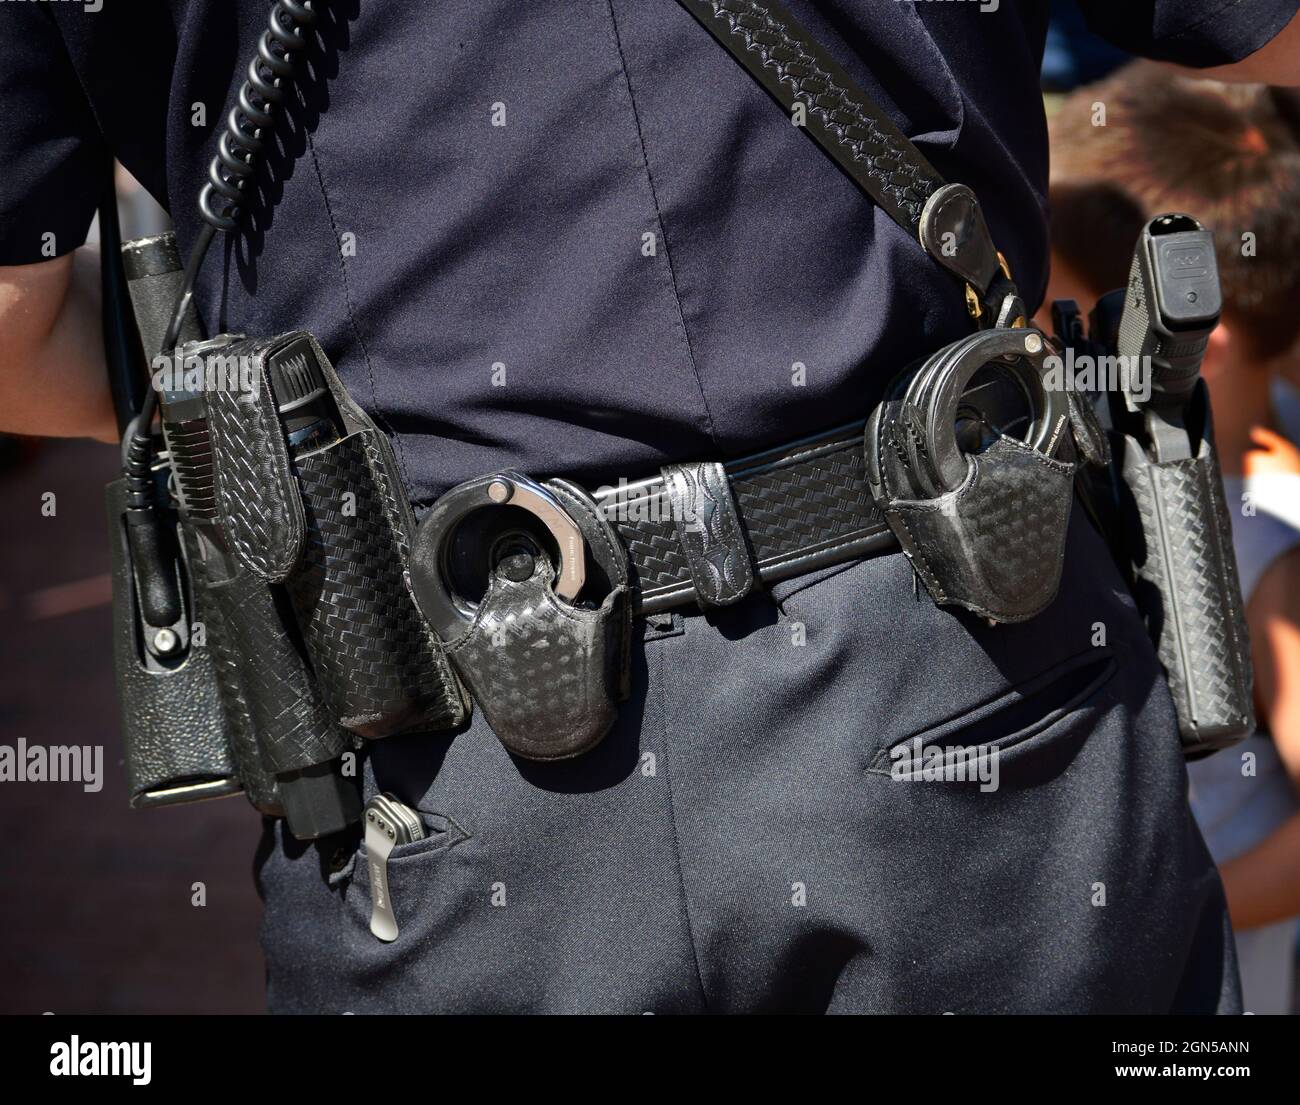 A well equipped service vest worn by a police officer in Santa Fe, New Mexico. Stock Photo